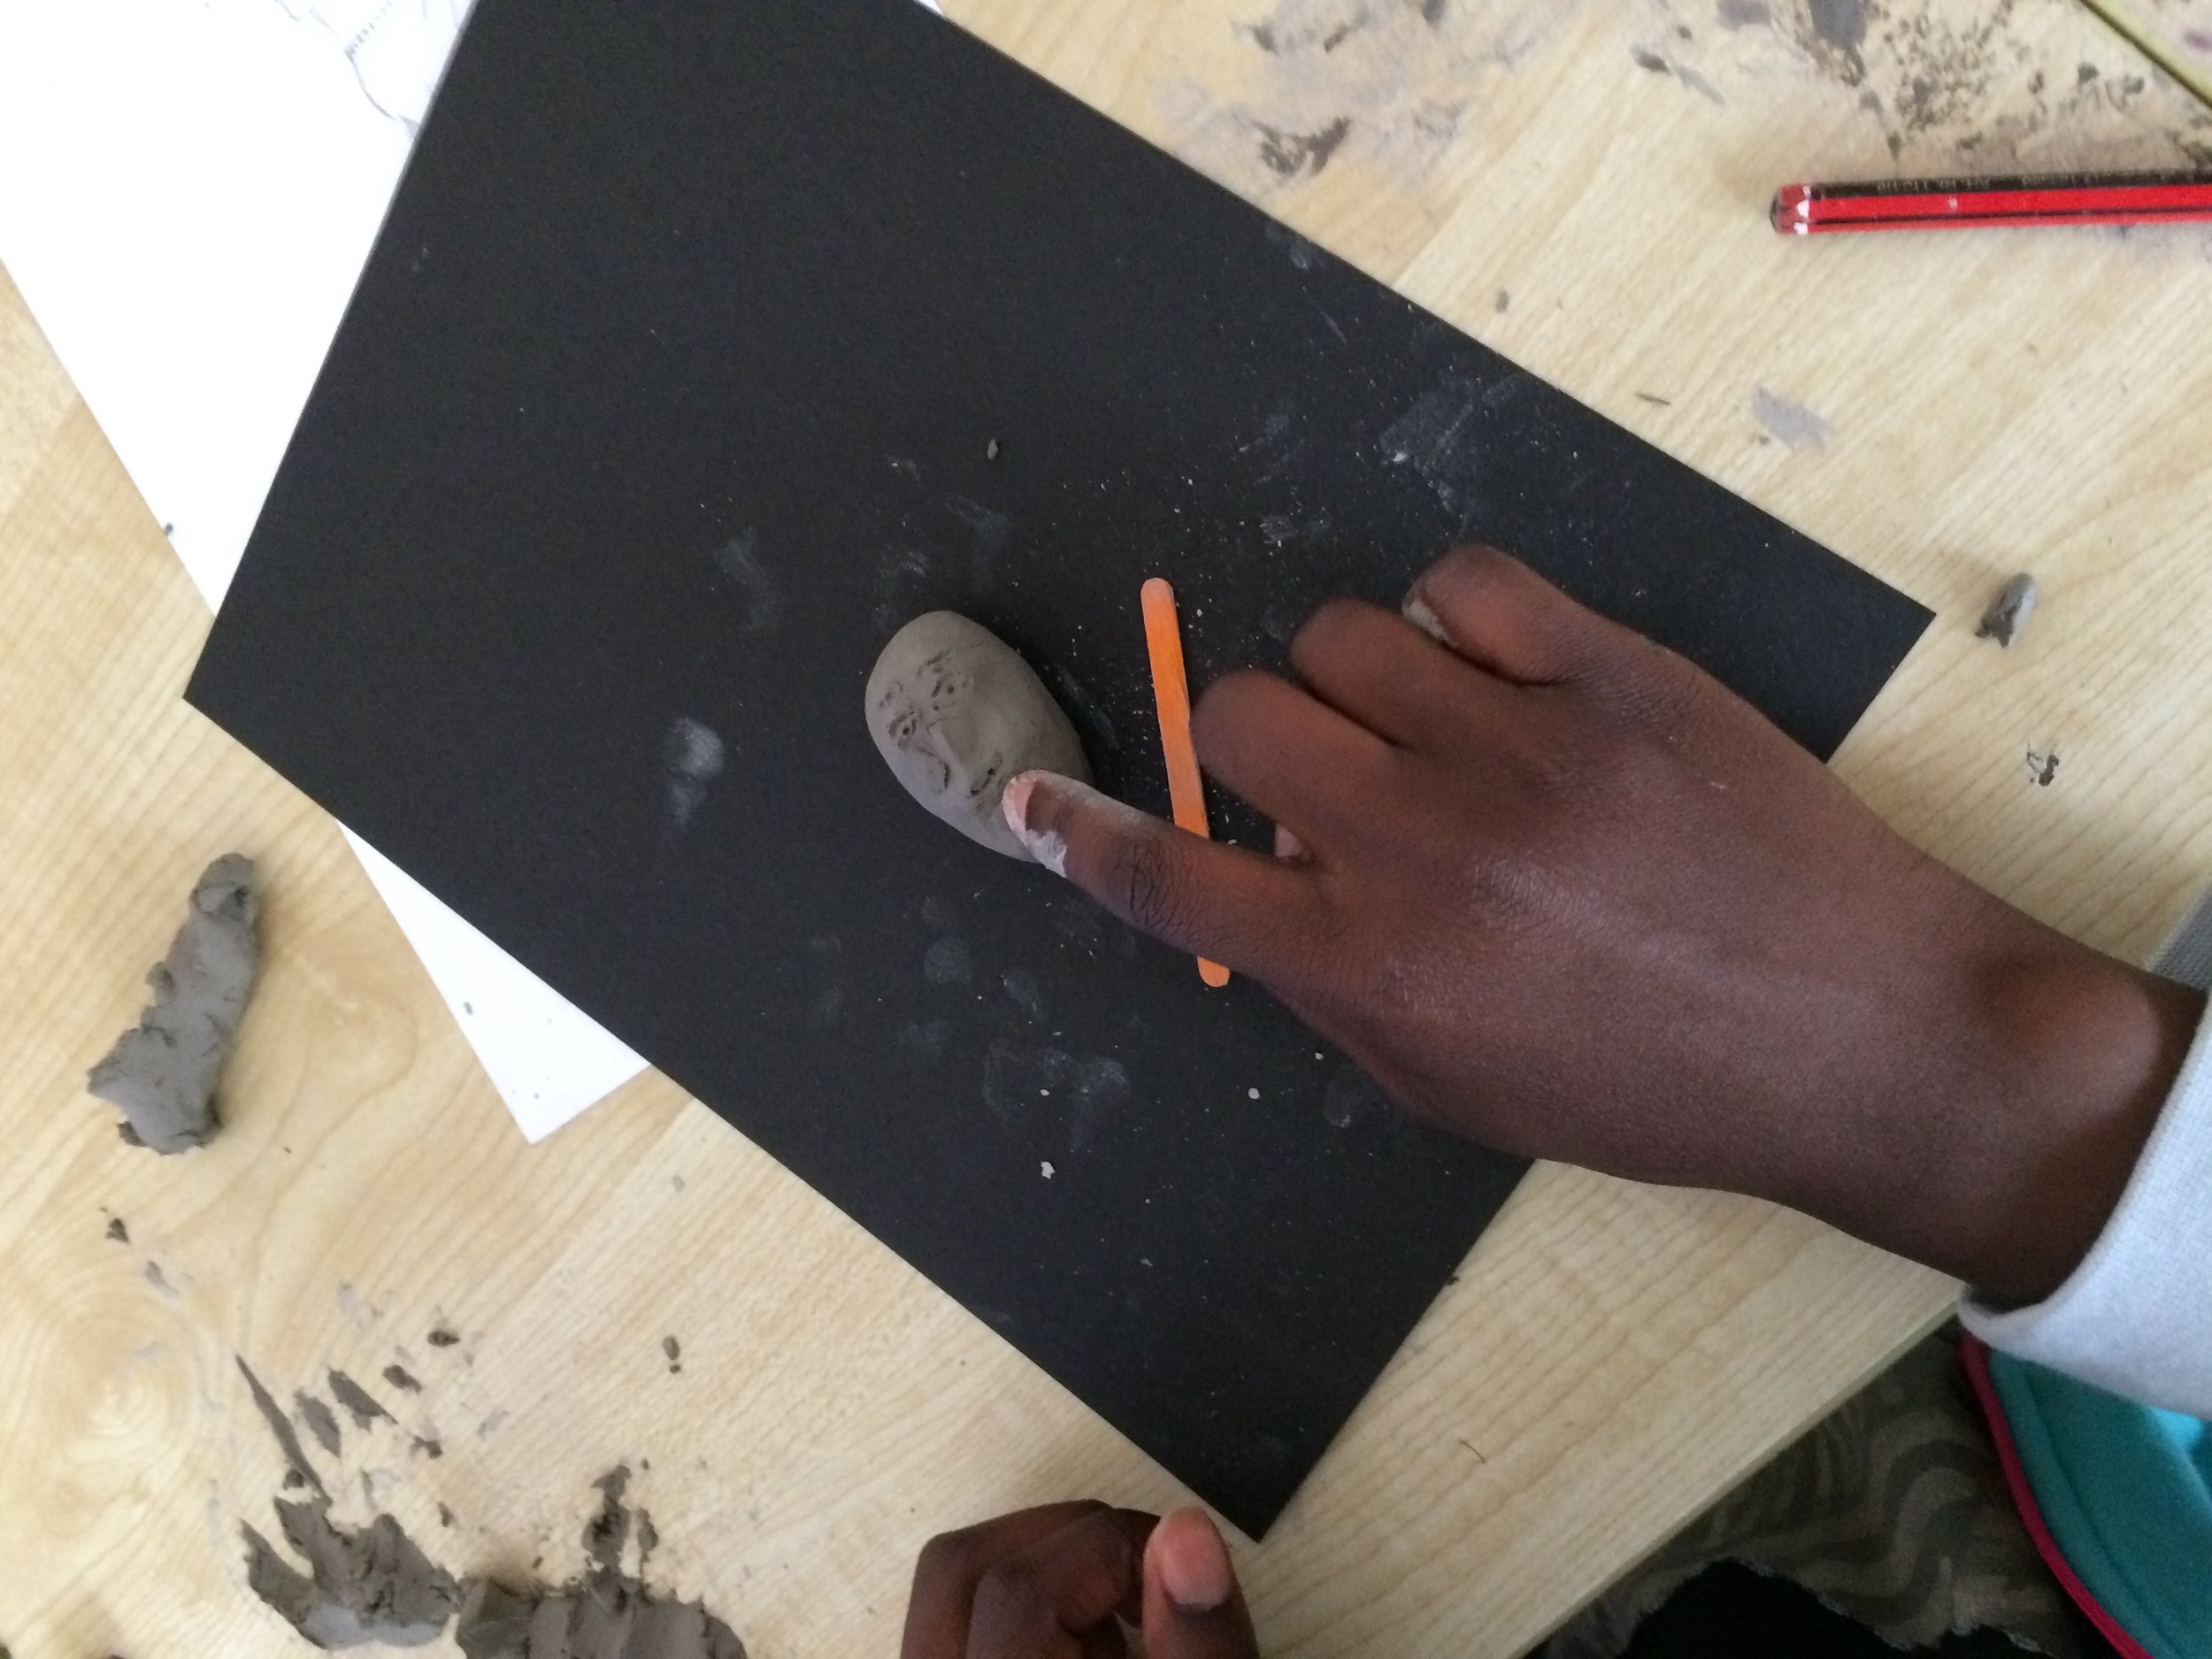  This image is of the early stages of a piece of sculpture representing the school principal Marianne.&nbsp; 